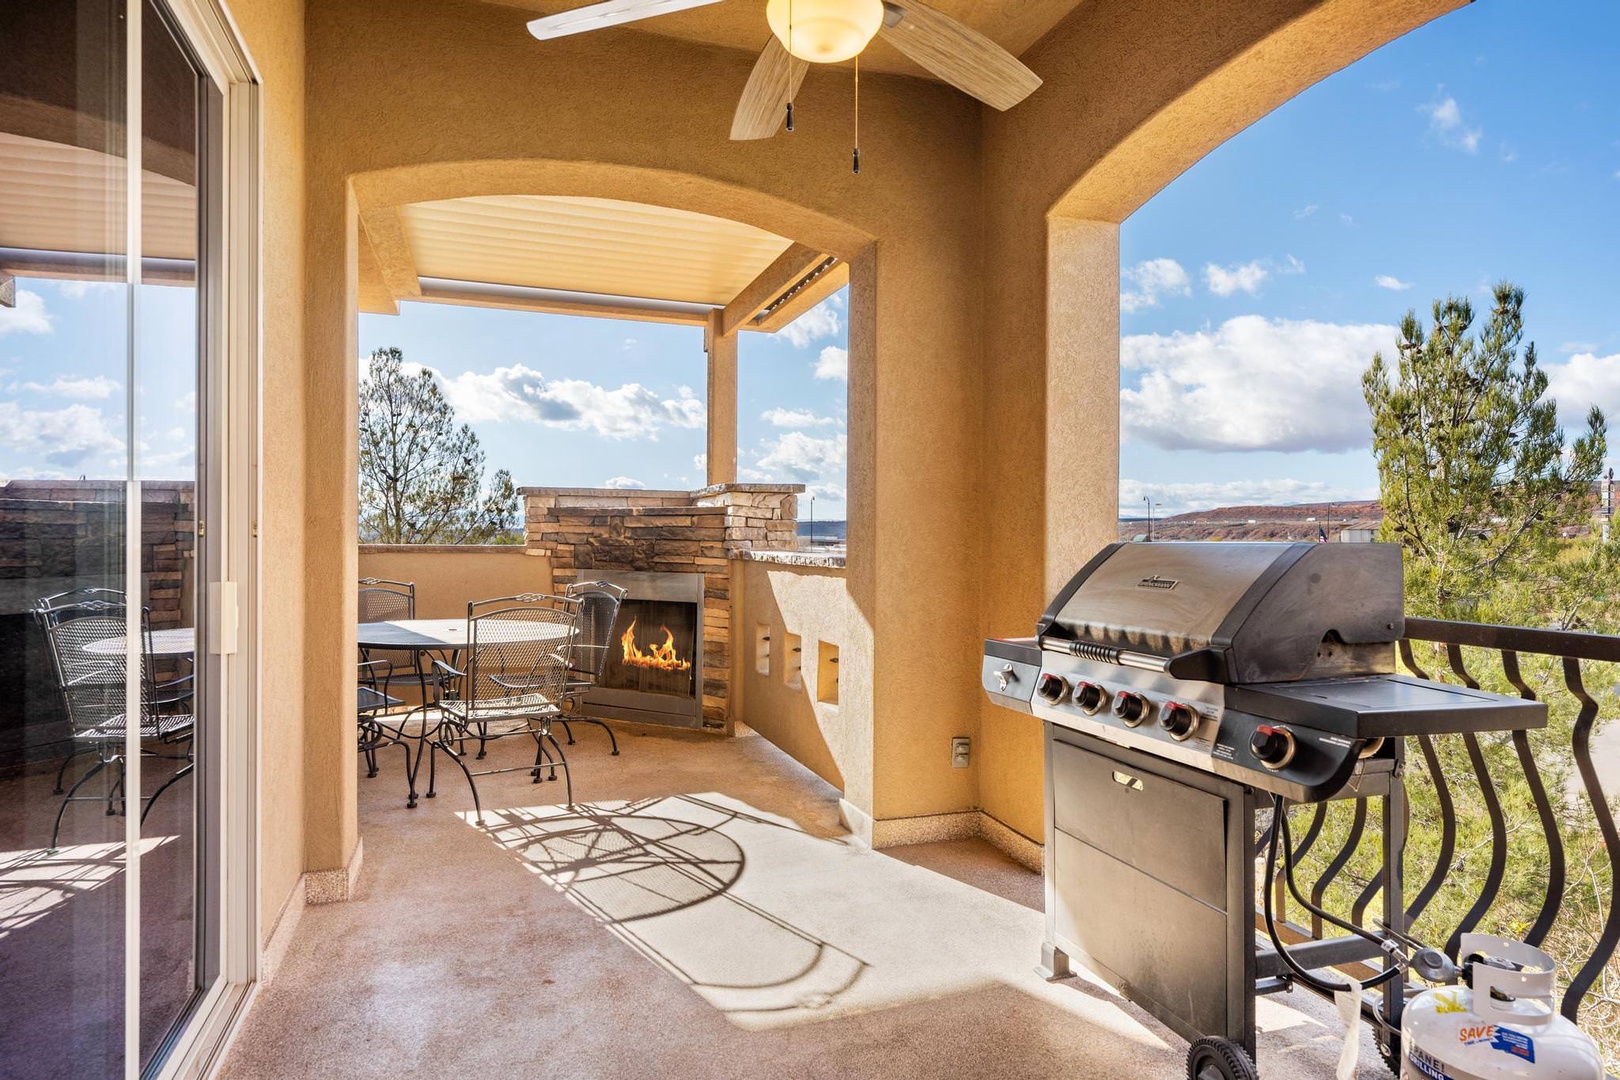 Balcony with outdoor dining and gas BBQ grill